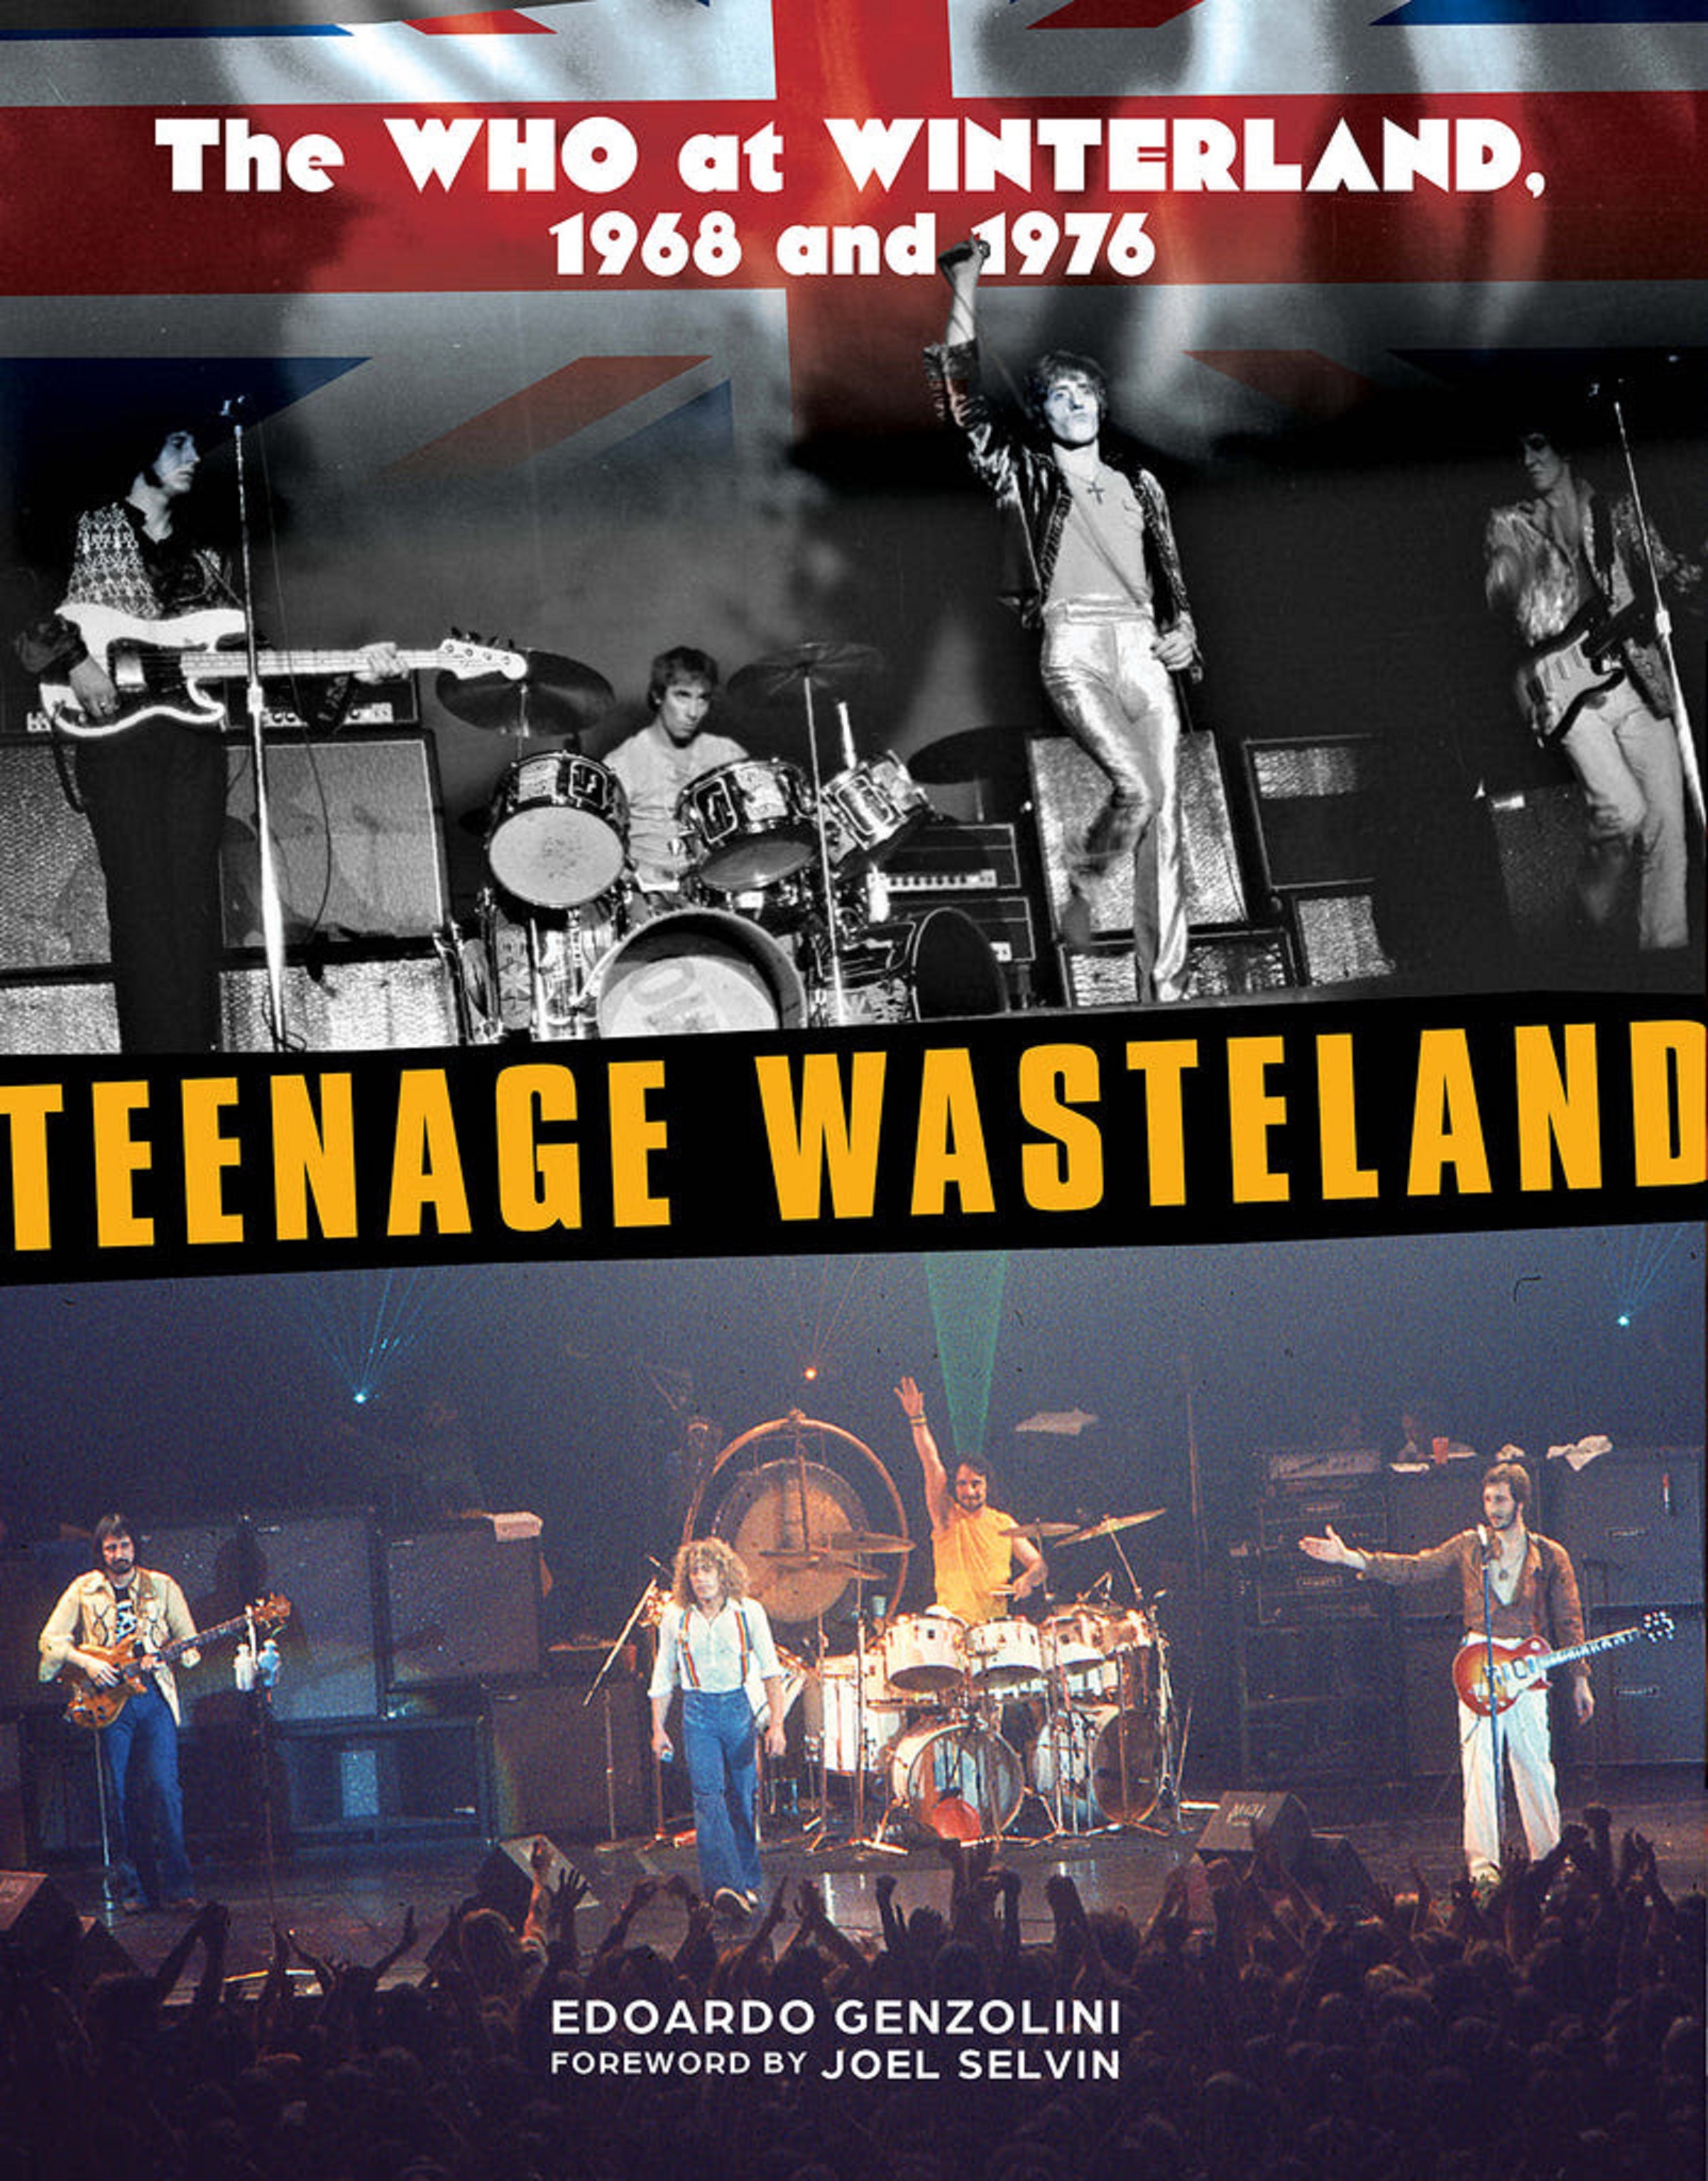 Teenage Wasteland: The Who at Winterland 1968 and 1976